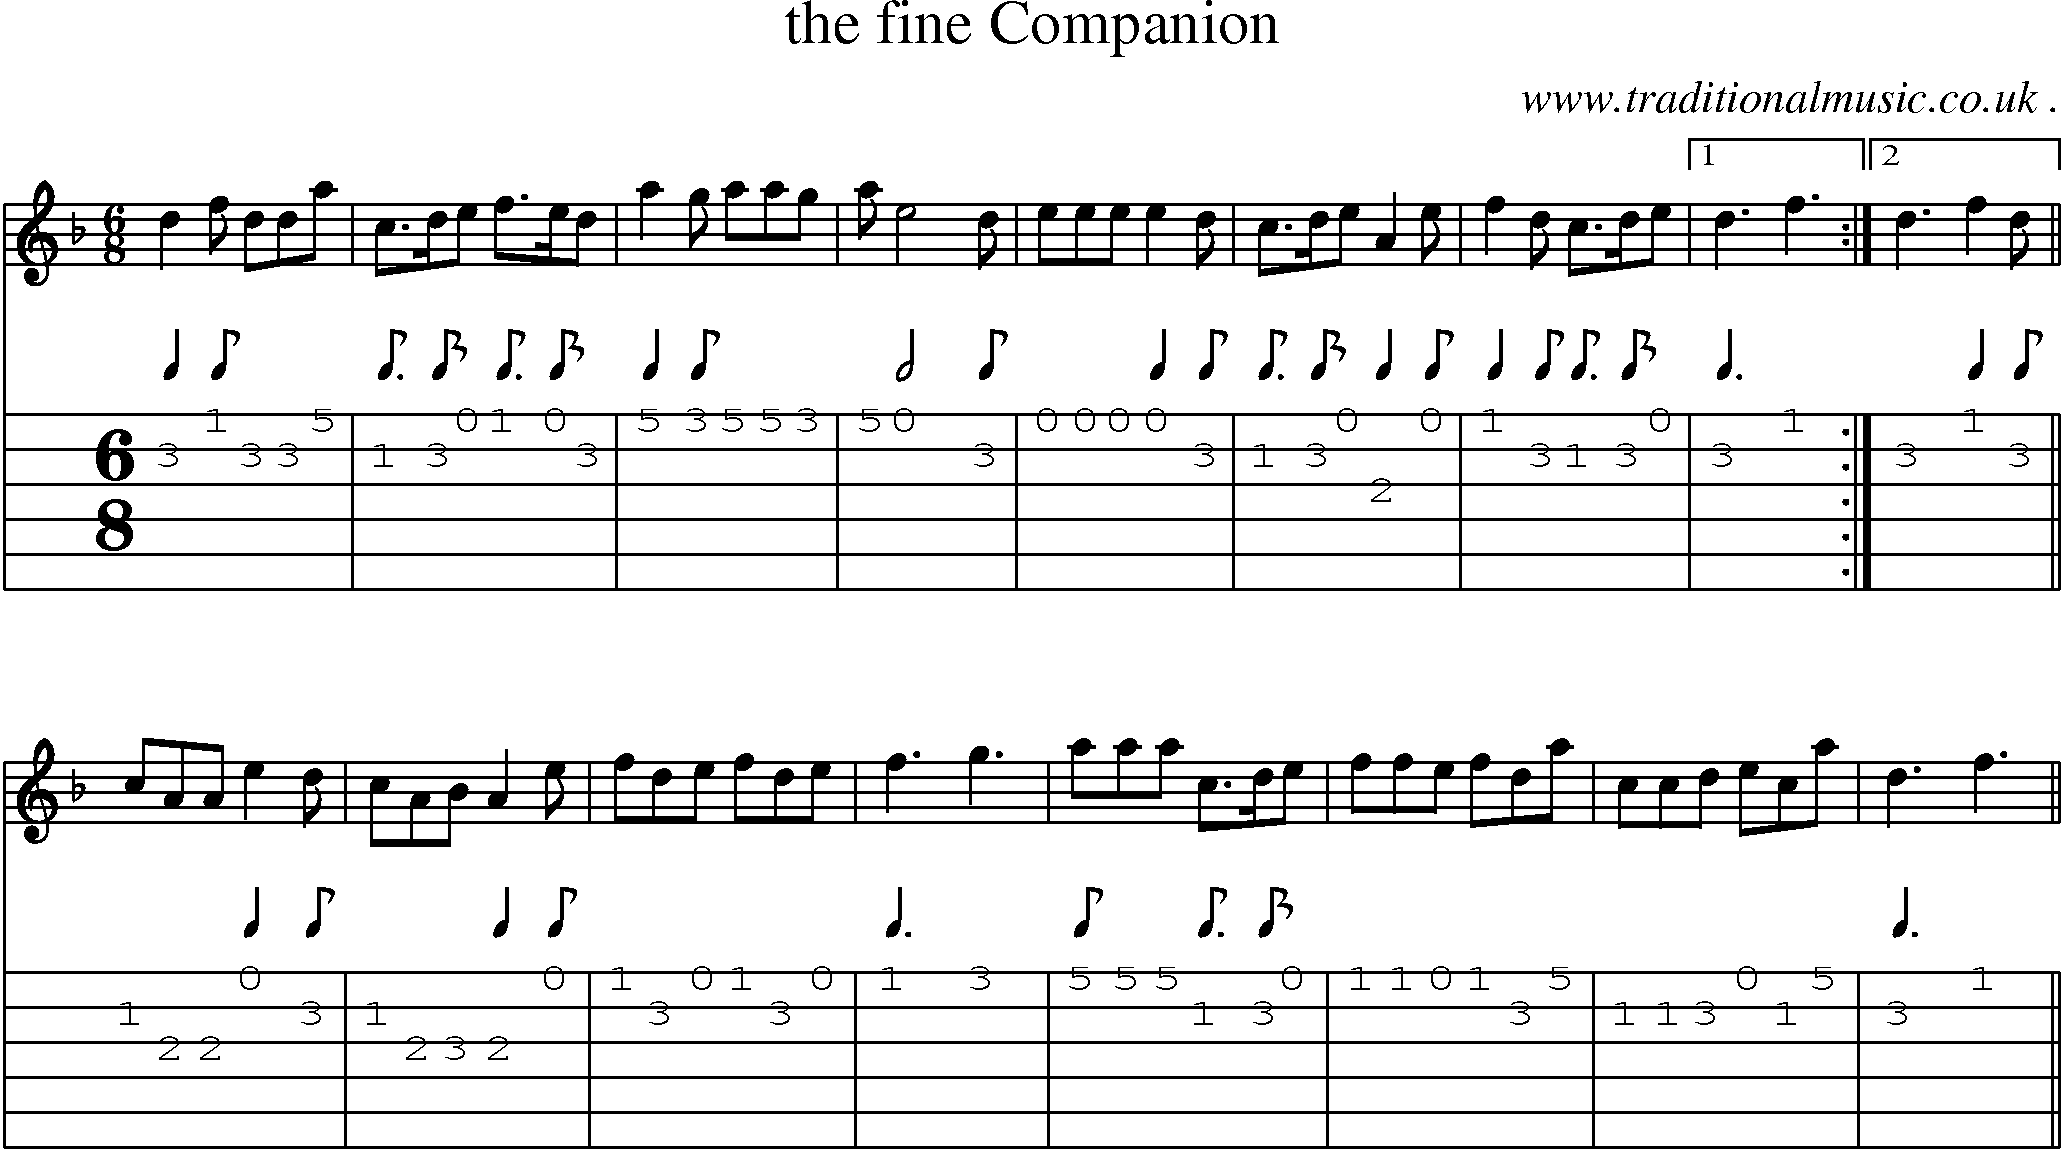 Sheet-music  score, Chords and Guitar Tabs for The Fine Companion